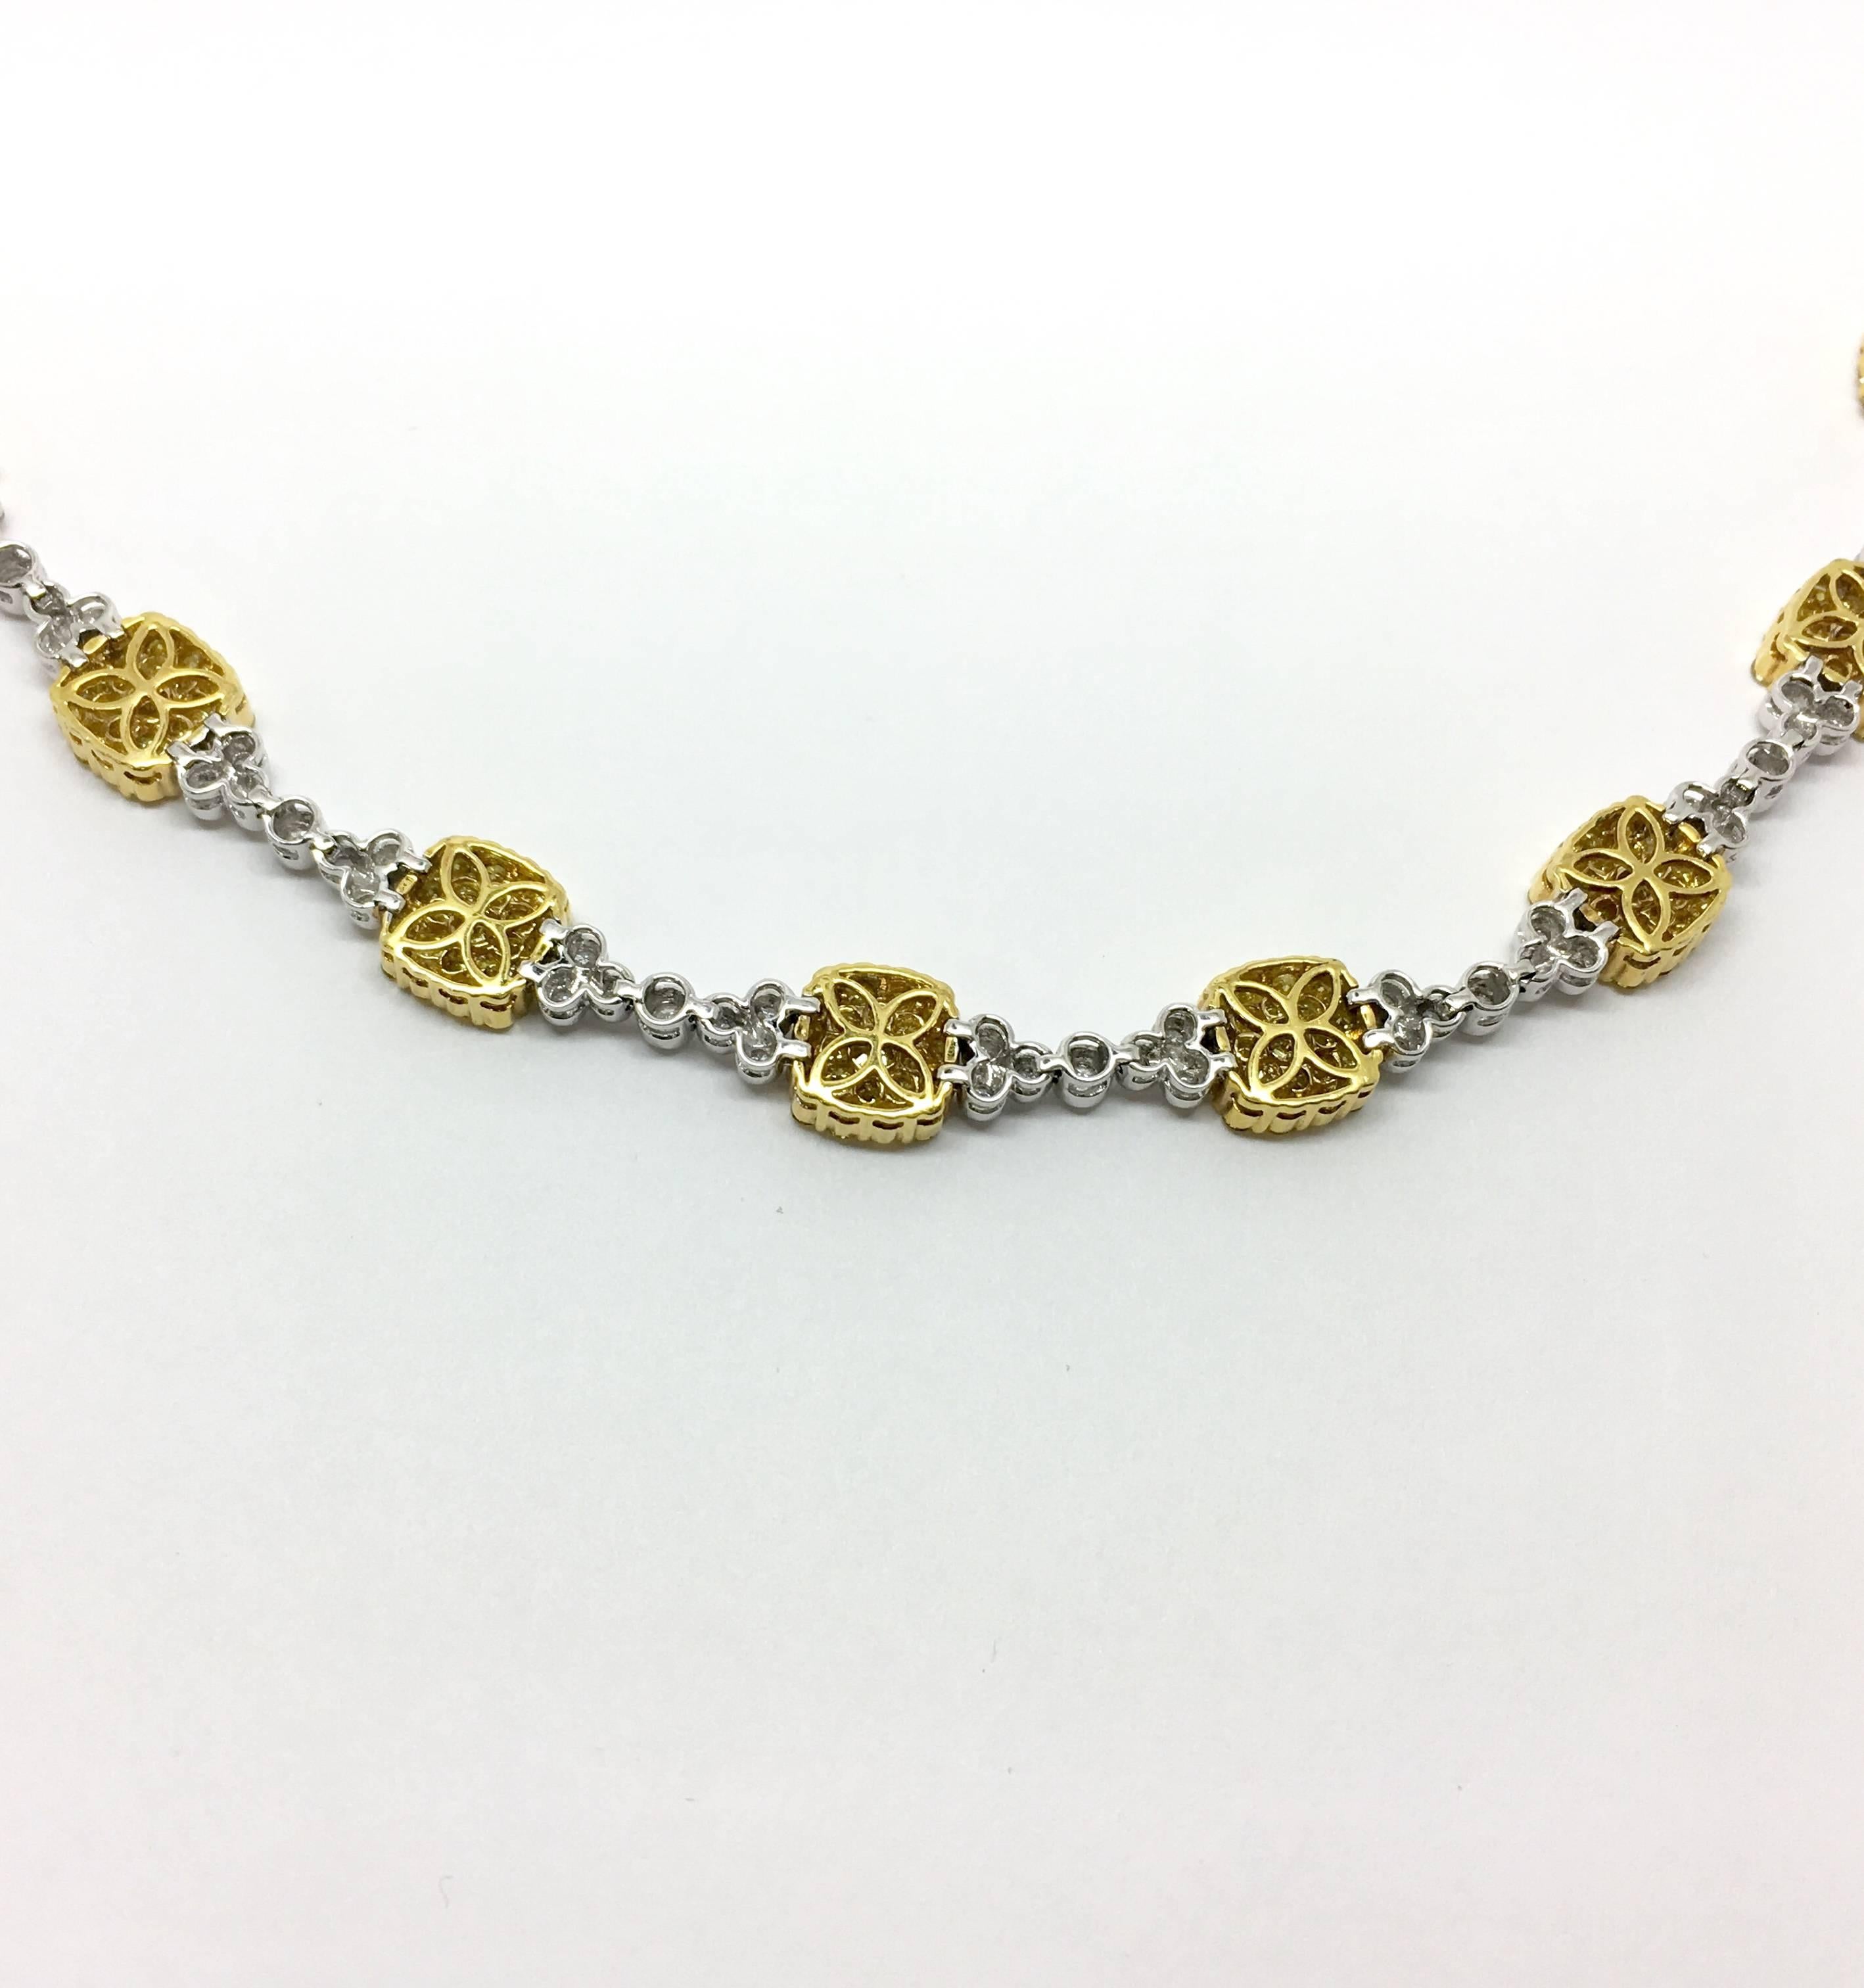 One 18 karat white and yellow gold cushion shape style fancy diamond necklace. This piece  contains 63 round brilliant diamonds 1.50 total carat weight and 189 enhanced yellow diamonds with a total weight of 6.10 carat total weight.

*photo 5: